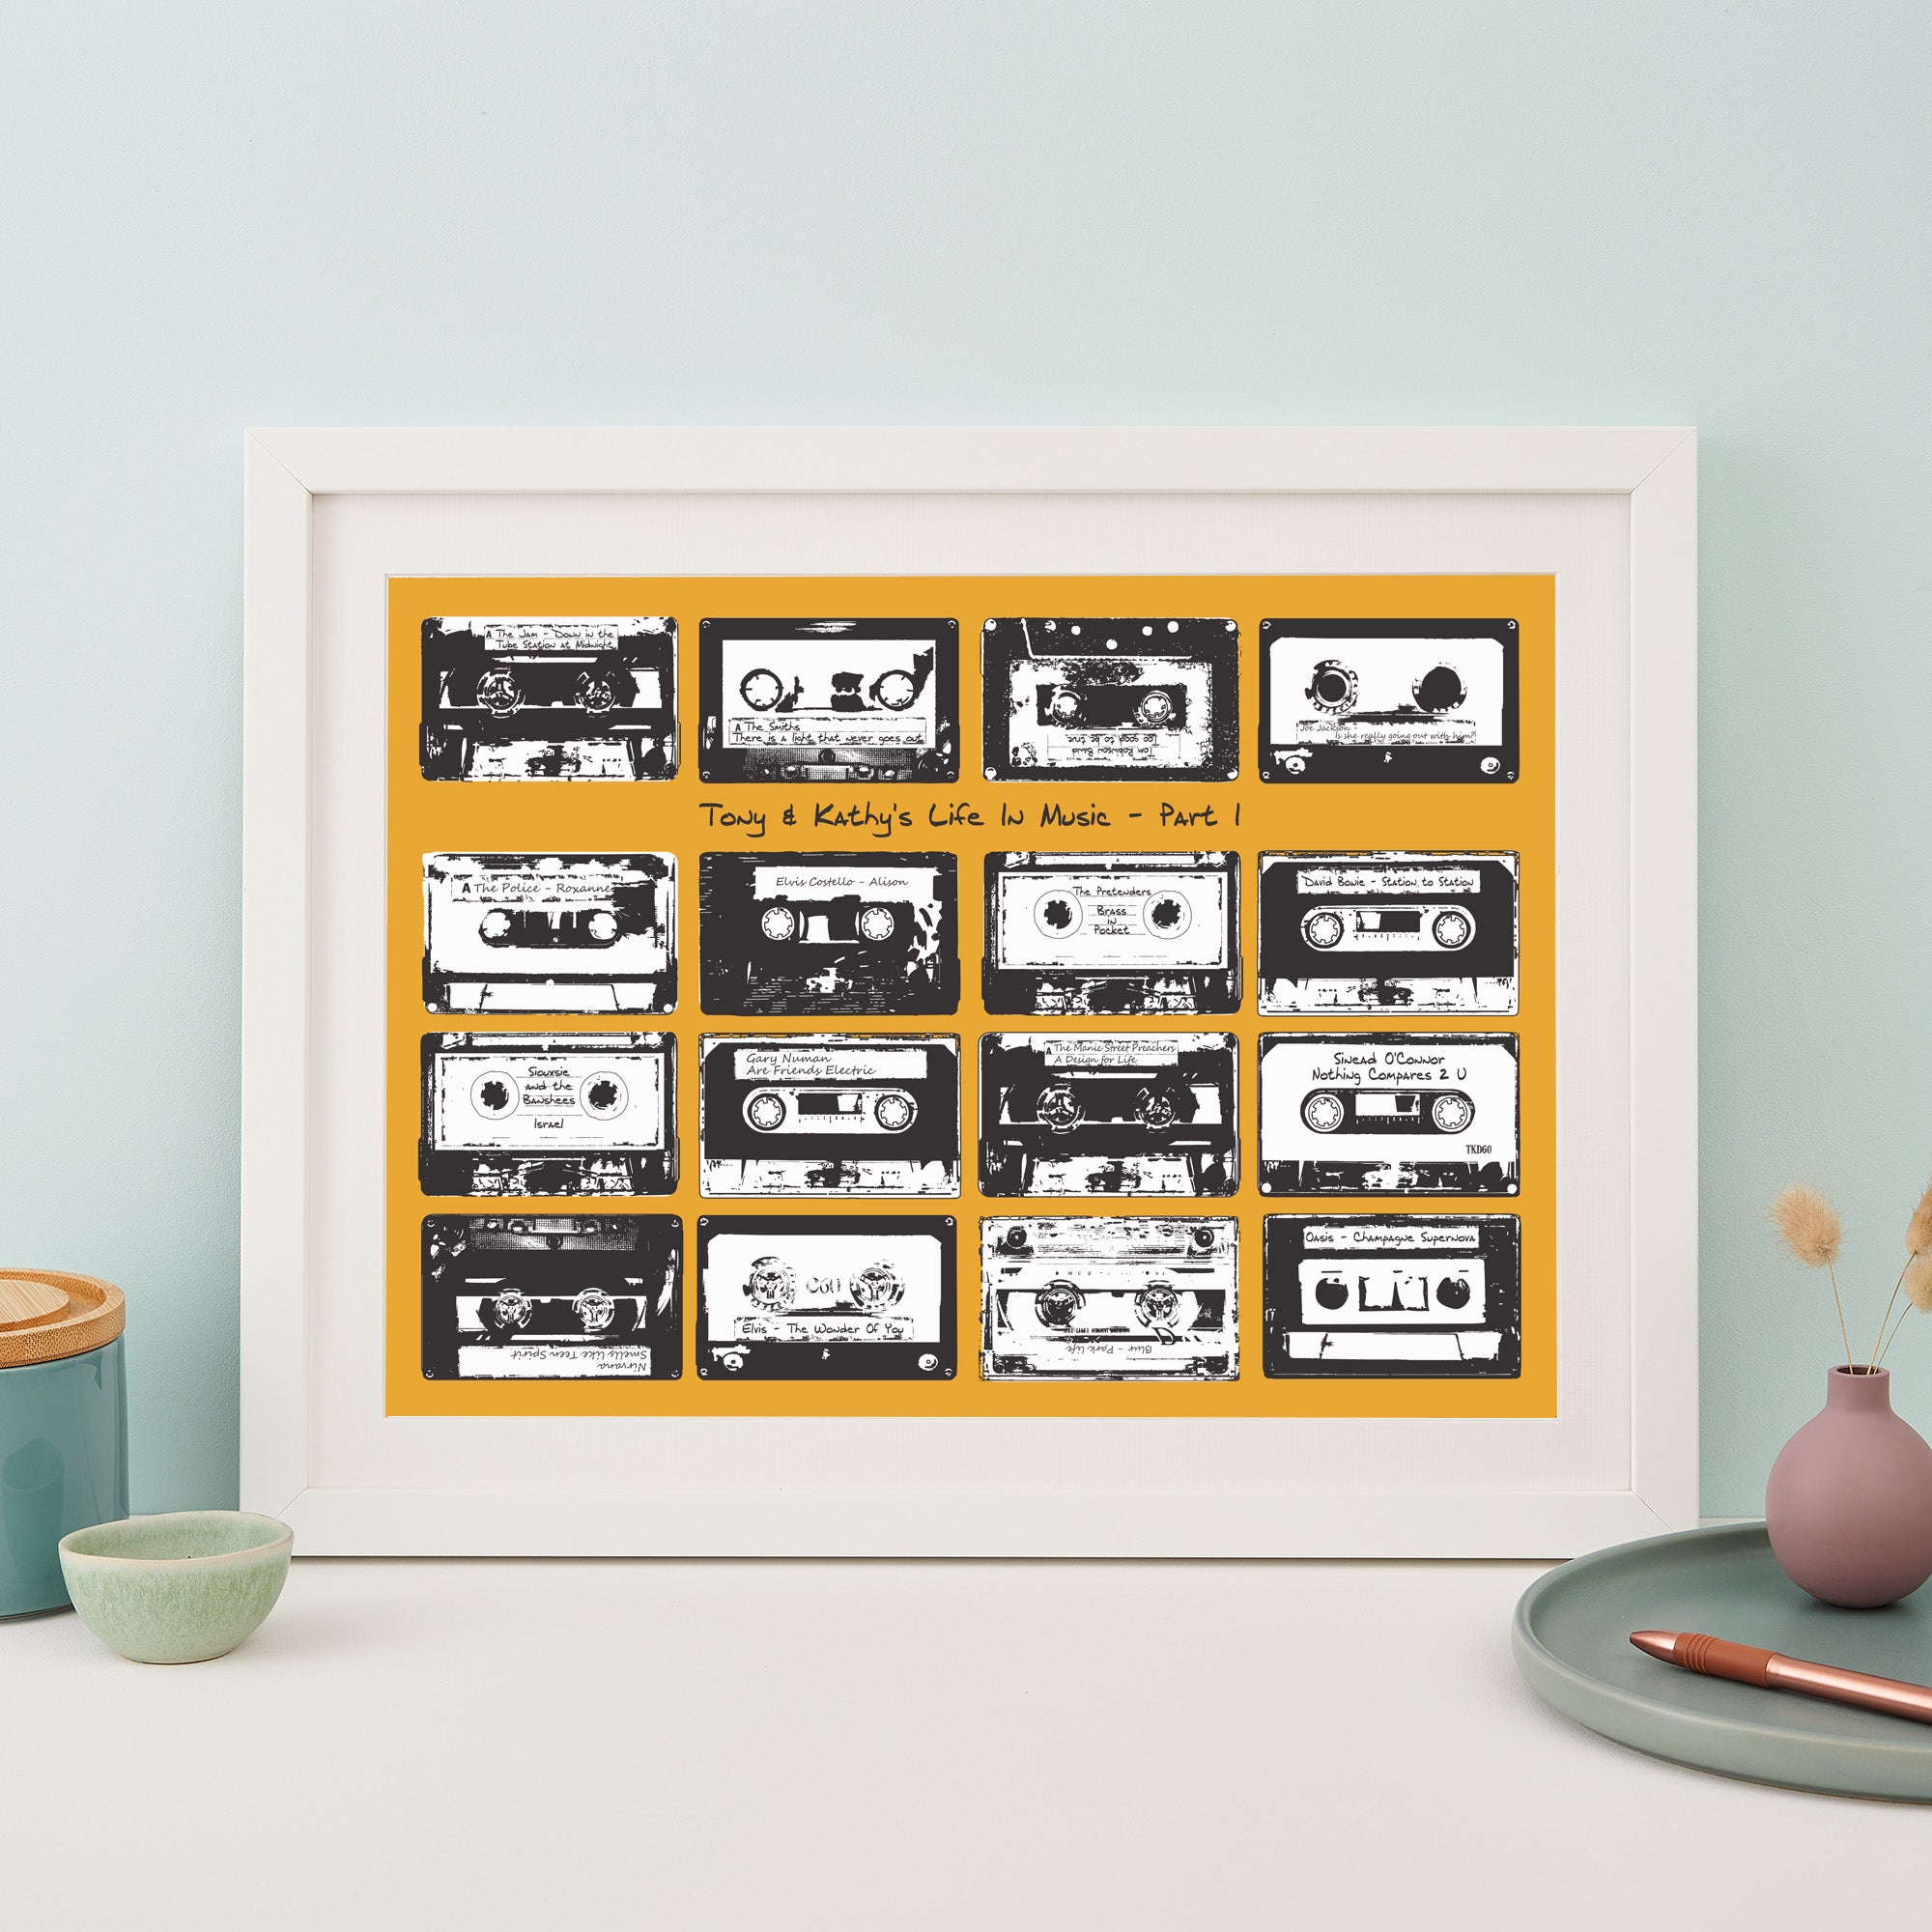 Framed print with 16 monochrome music cassettes on a gold coloured background and personalised text.